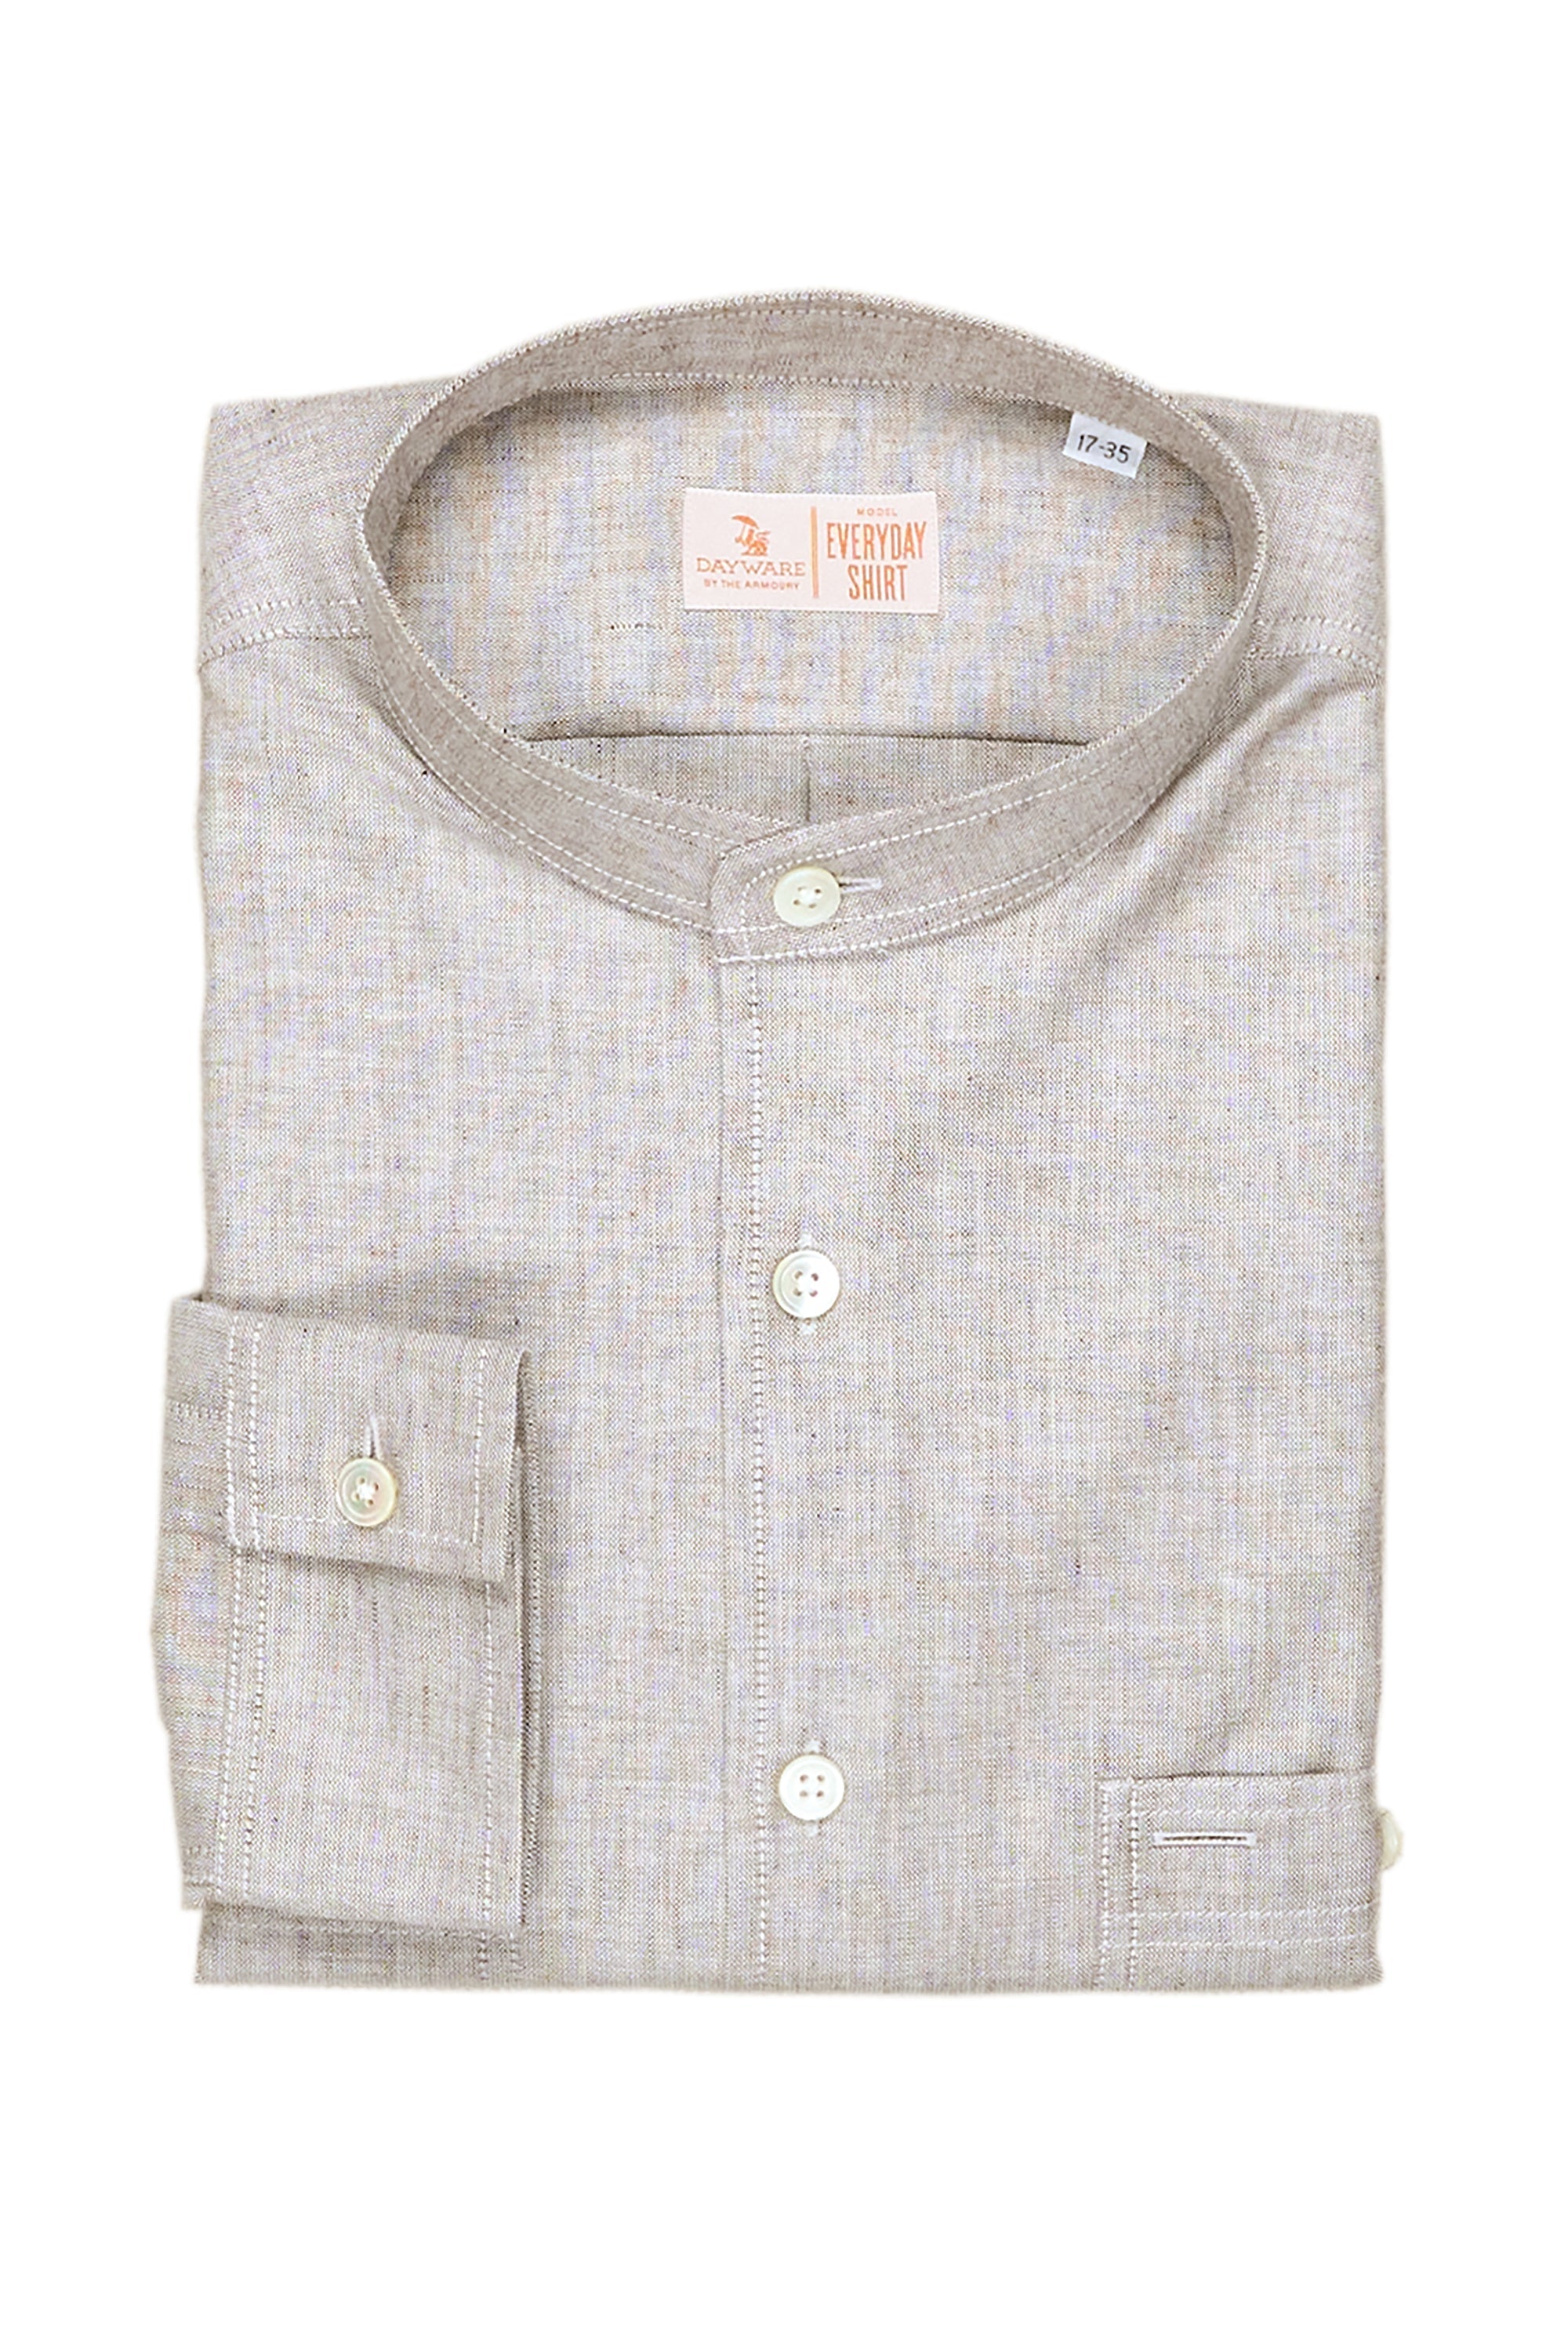 The Armoury Barley Cotton Oxford Everyday Shirt